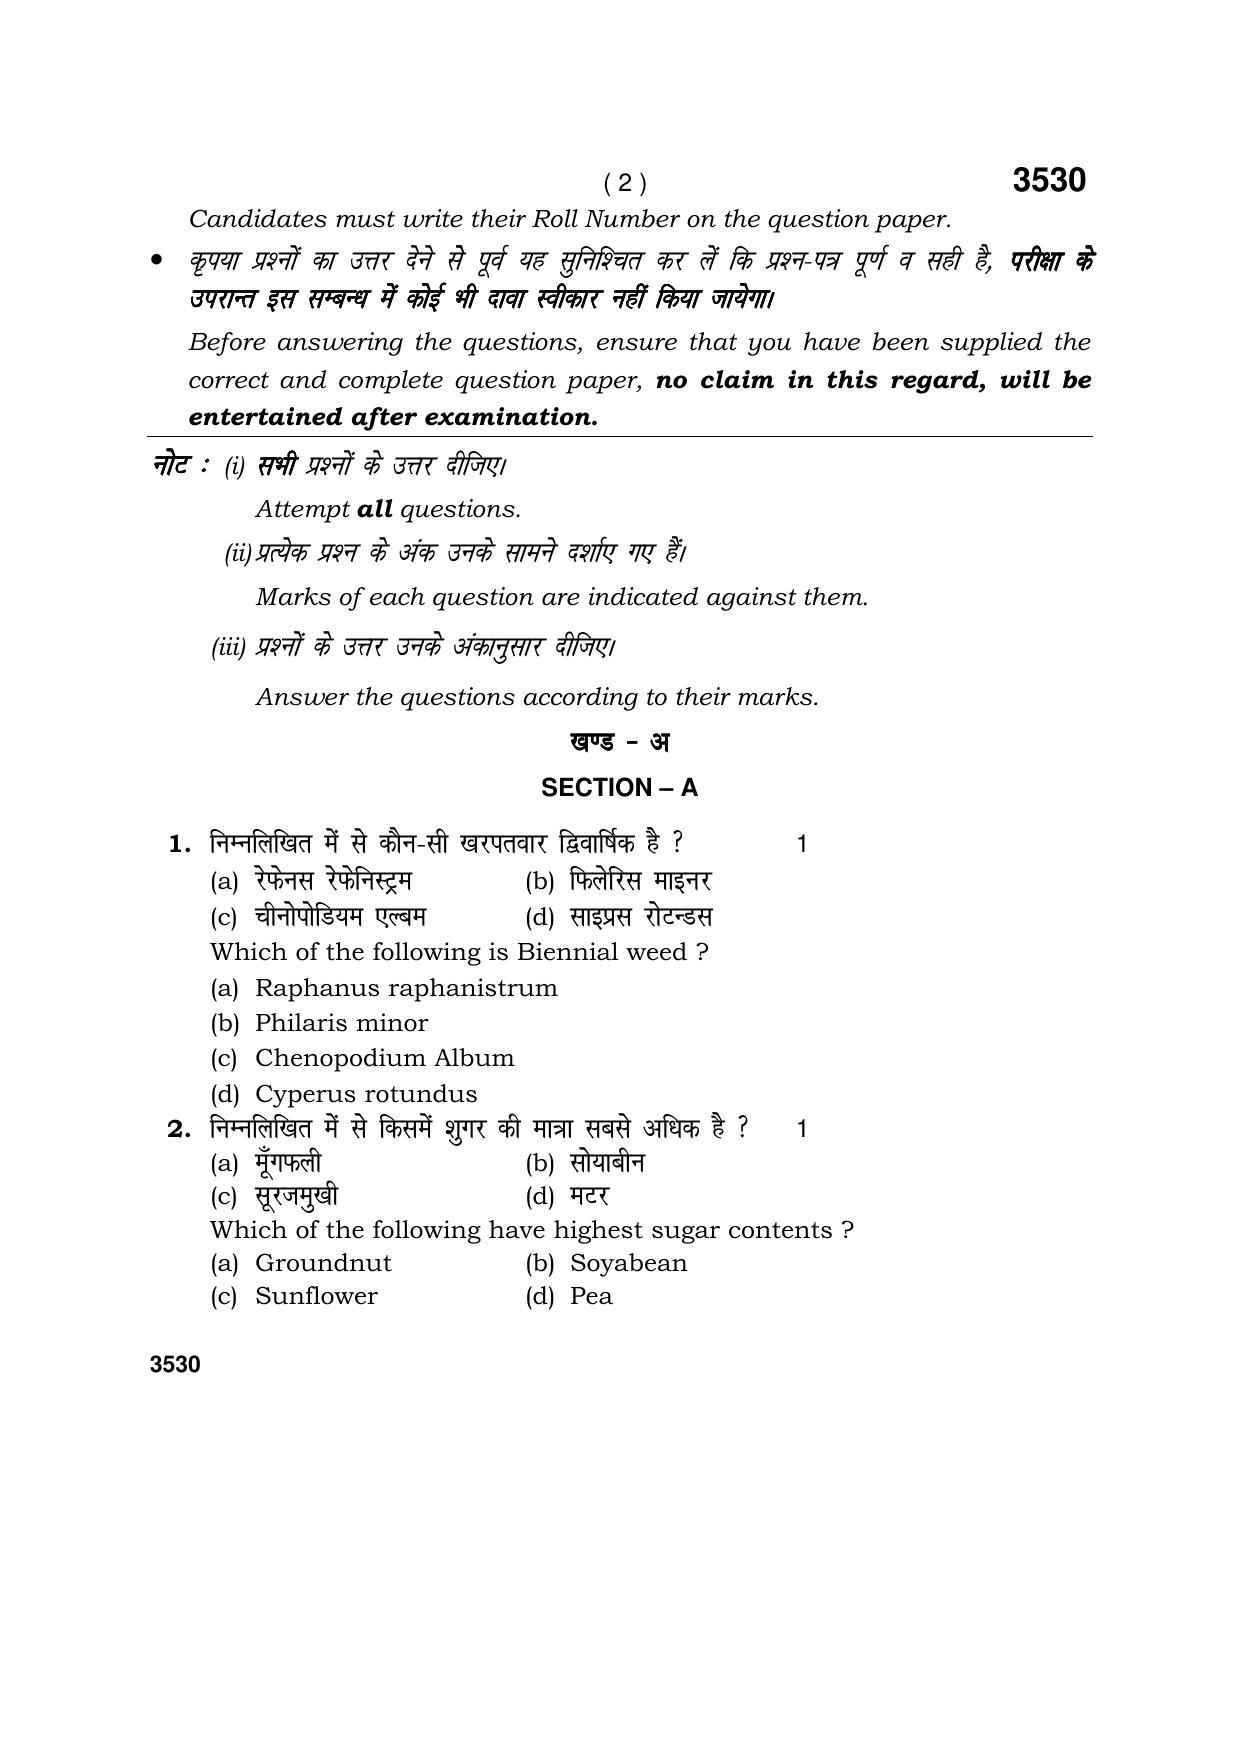 Haryana Board HBSE Class 10 Agriculture Paddy Farming 2018 Question Paper - Page 2